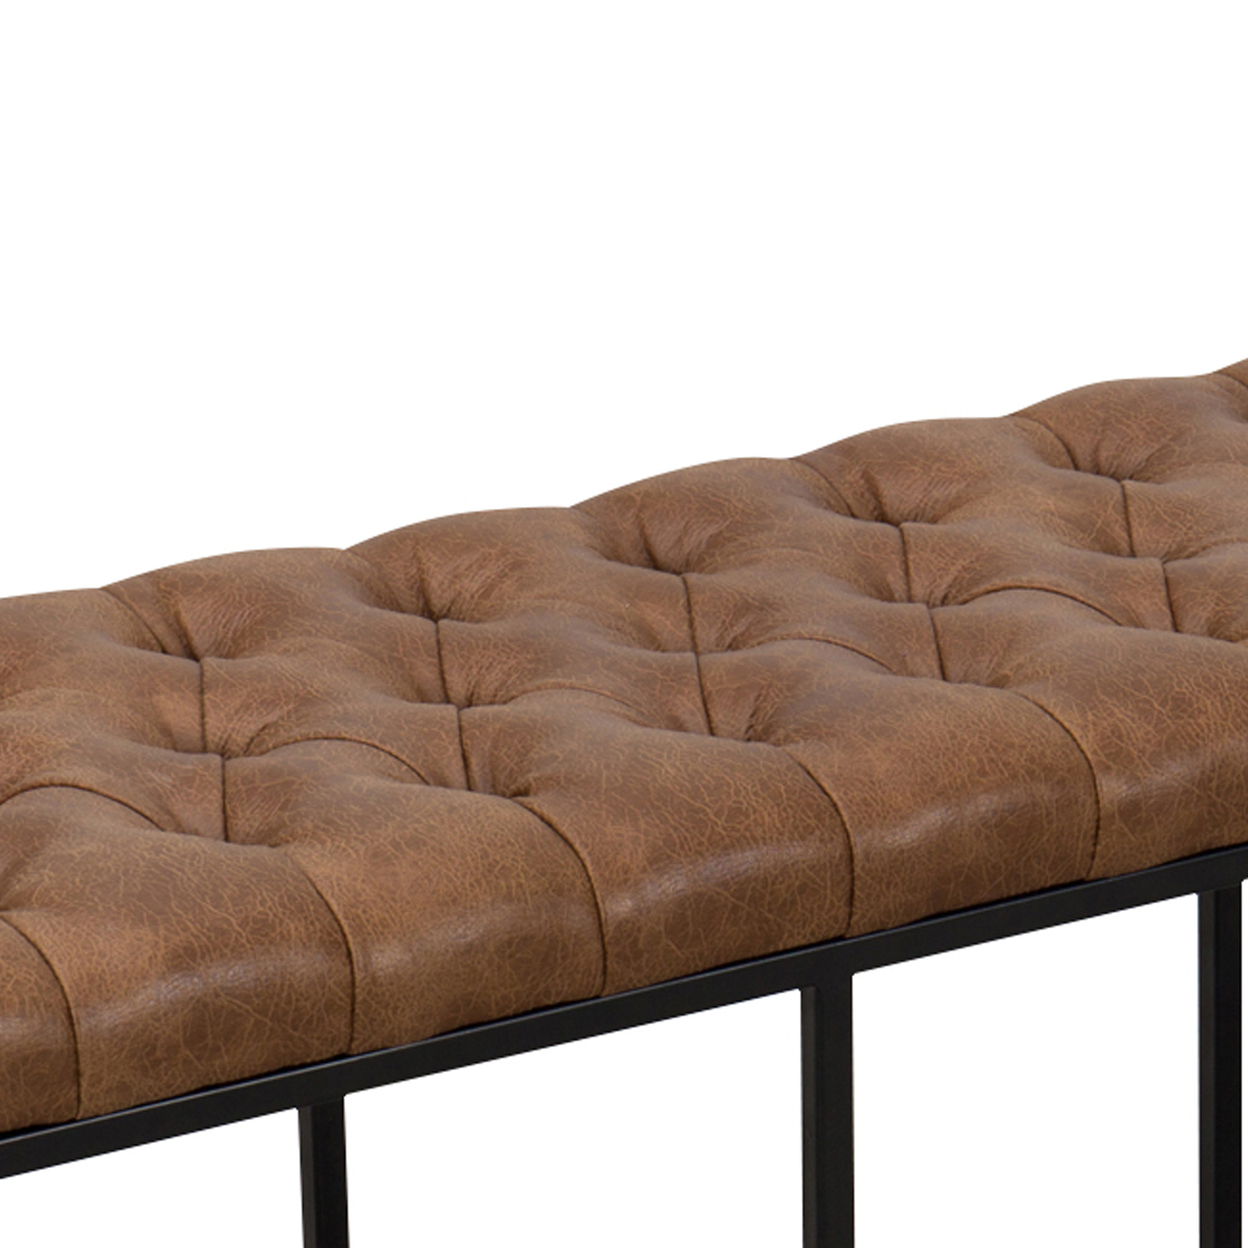 Leatherette Upholstered Bench With Button Tufted Cushioned Seat And Metal Base, Brown- Saltoro Sherpi